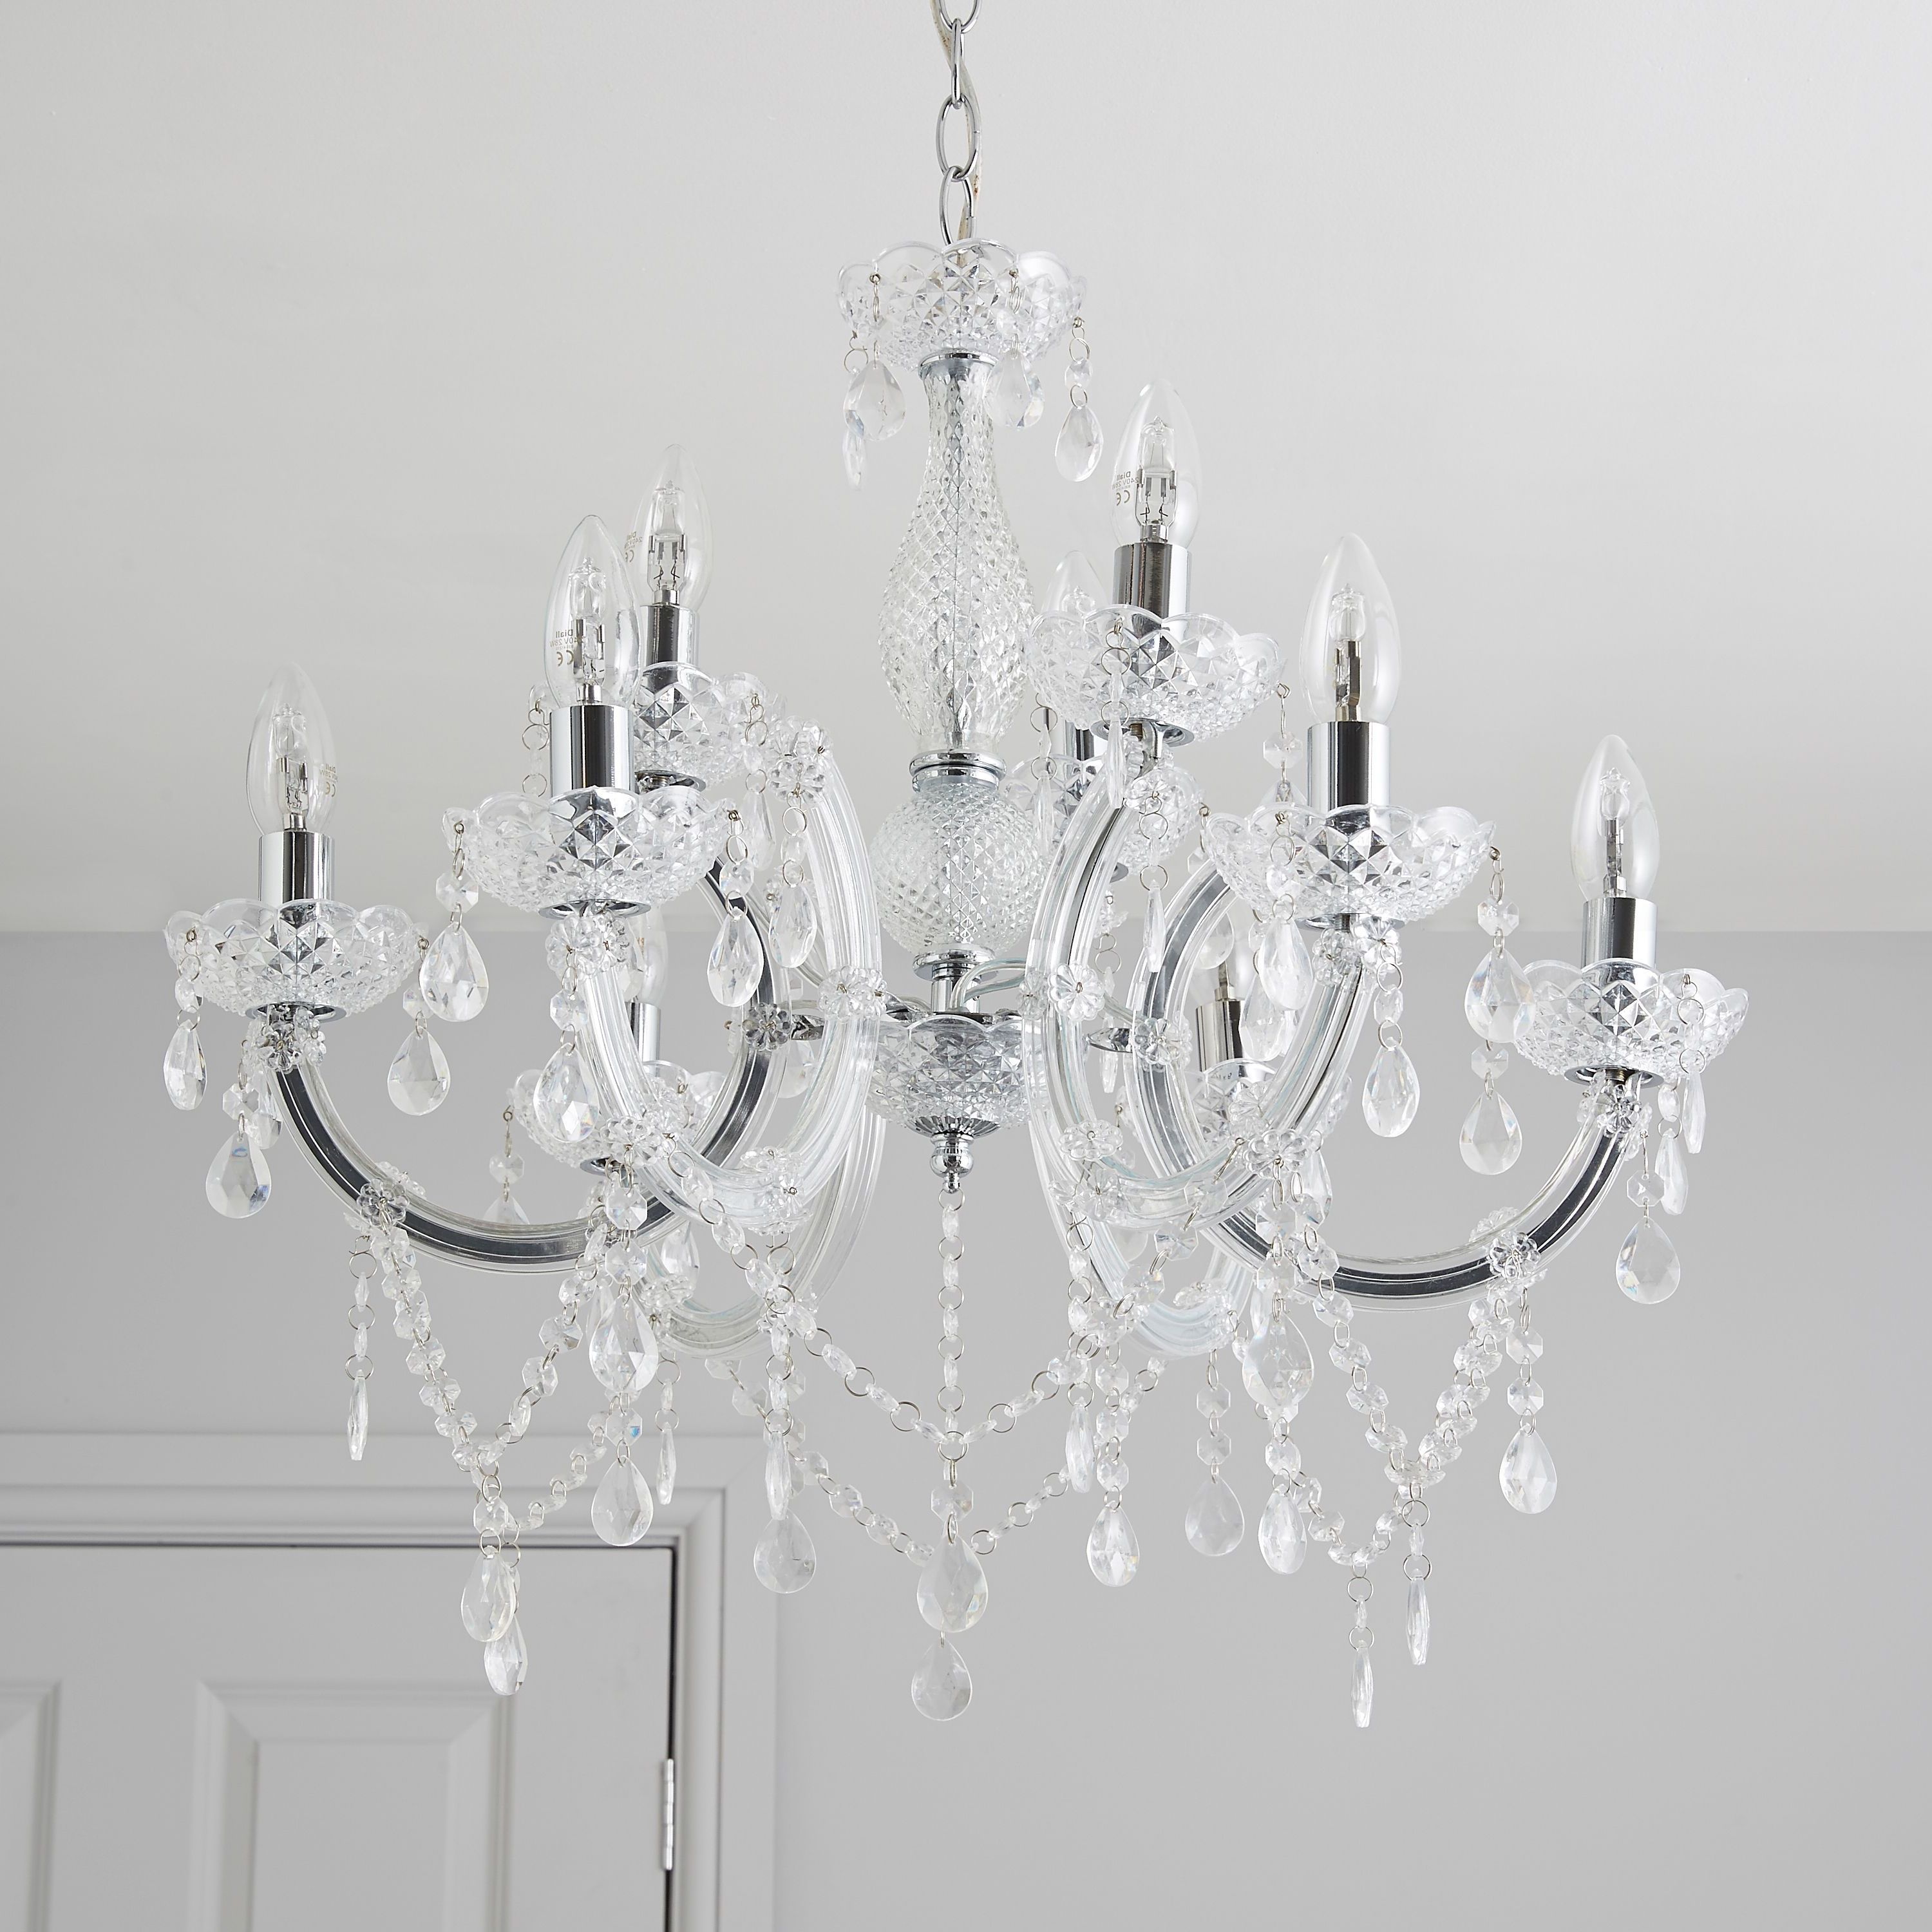 Fashionable Annelise Crystal Droplets Silver 9 Lamp Pendant Ceiling Light Inside Outdoor Ceiling Lights At B&q (View 4 of 20)